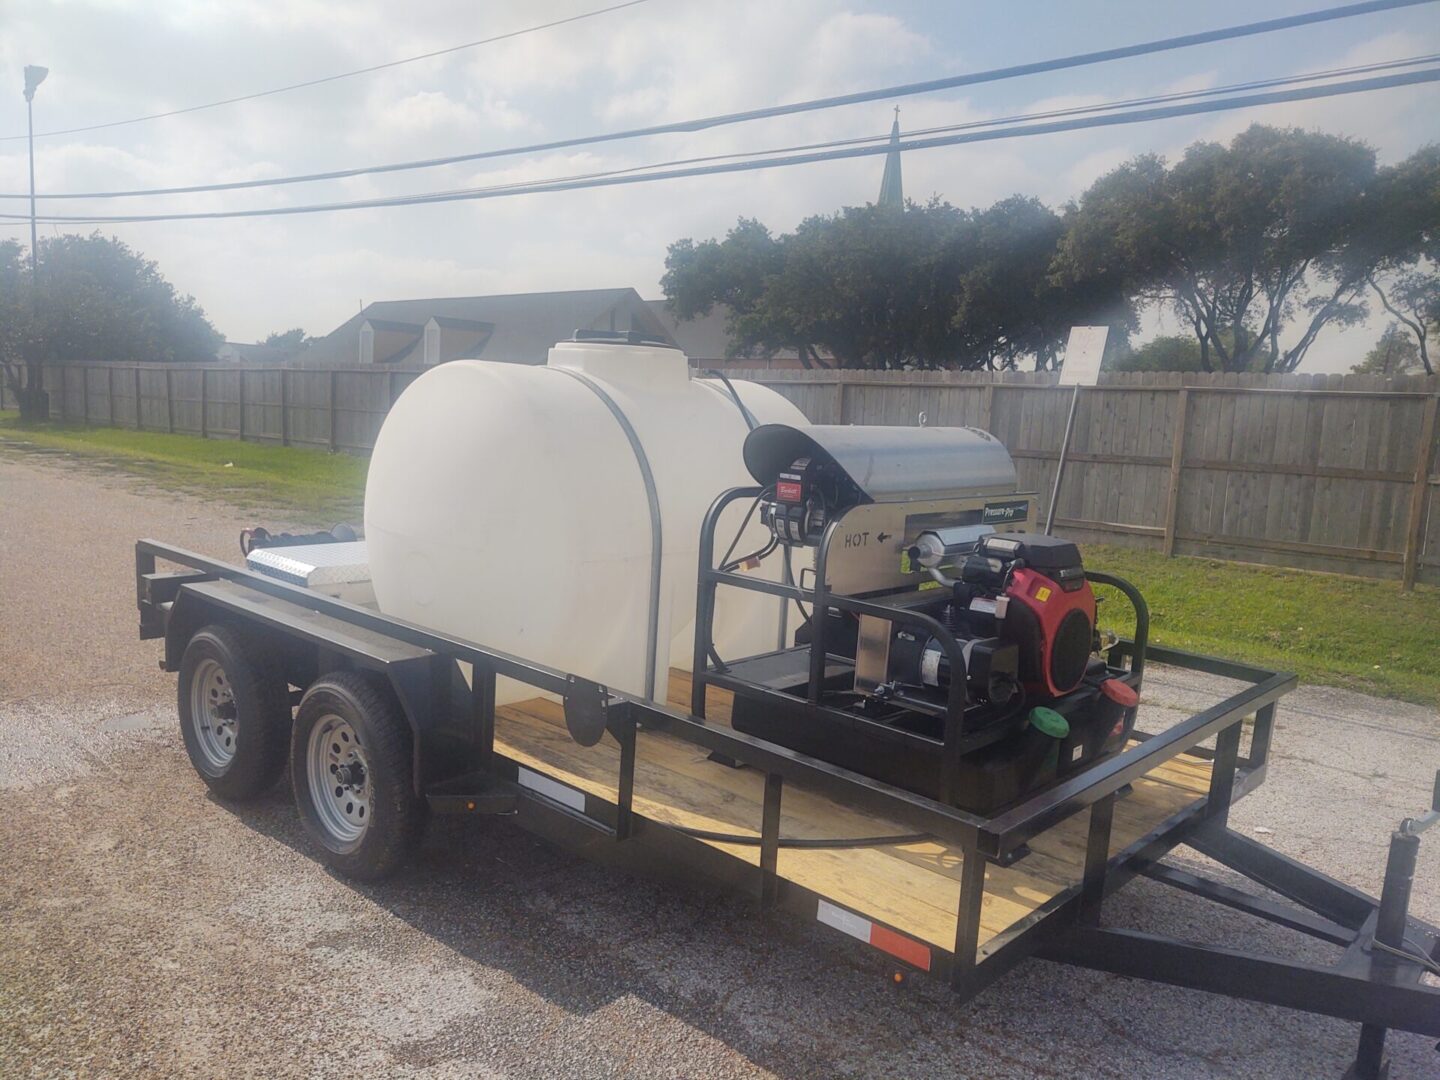 An industrial cleaning equipment water tank, white in color, mounted on a black dual-axle trailer with a generator and pump, parked on a gravel lot under clear skies.